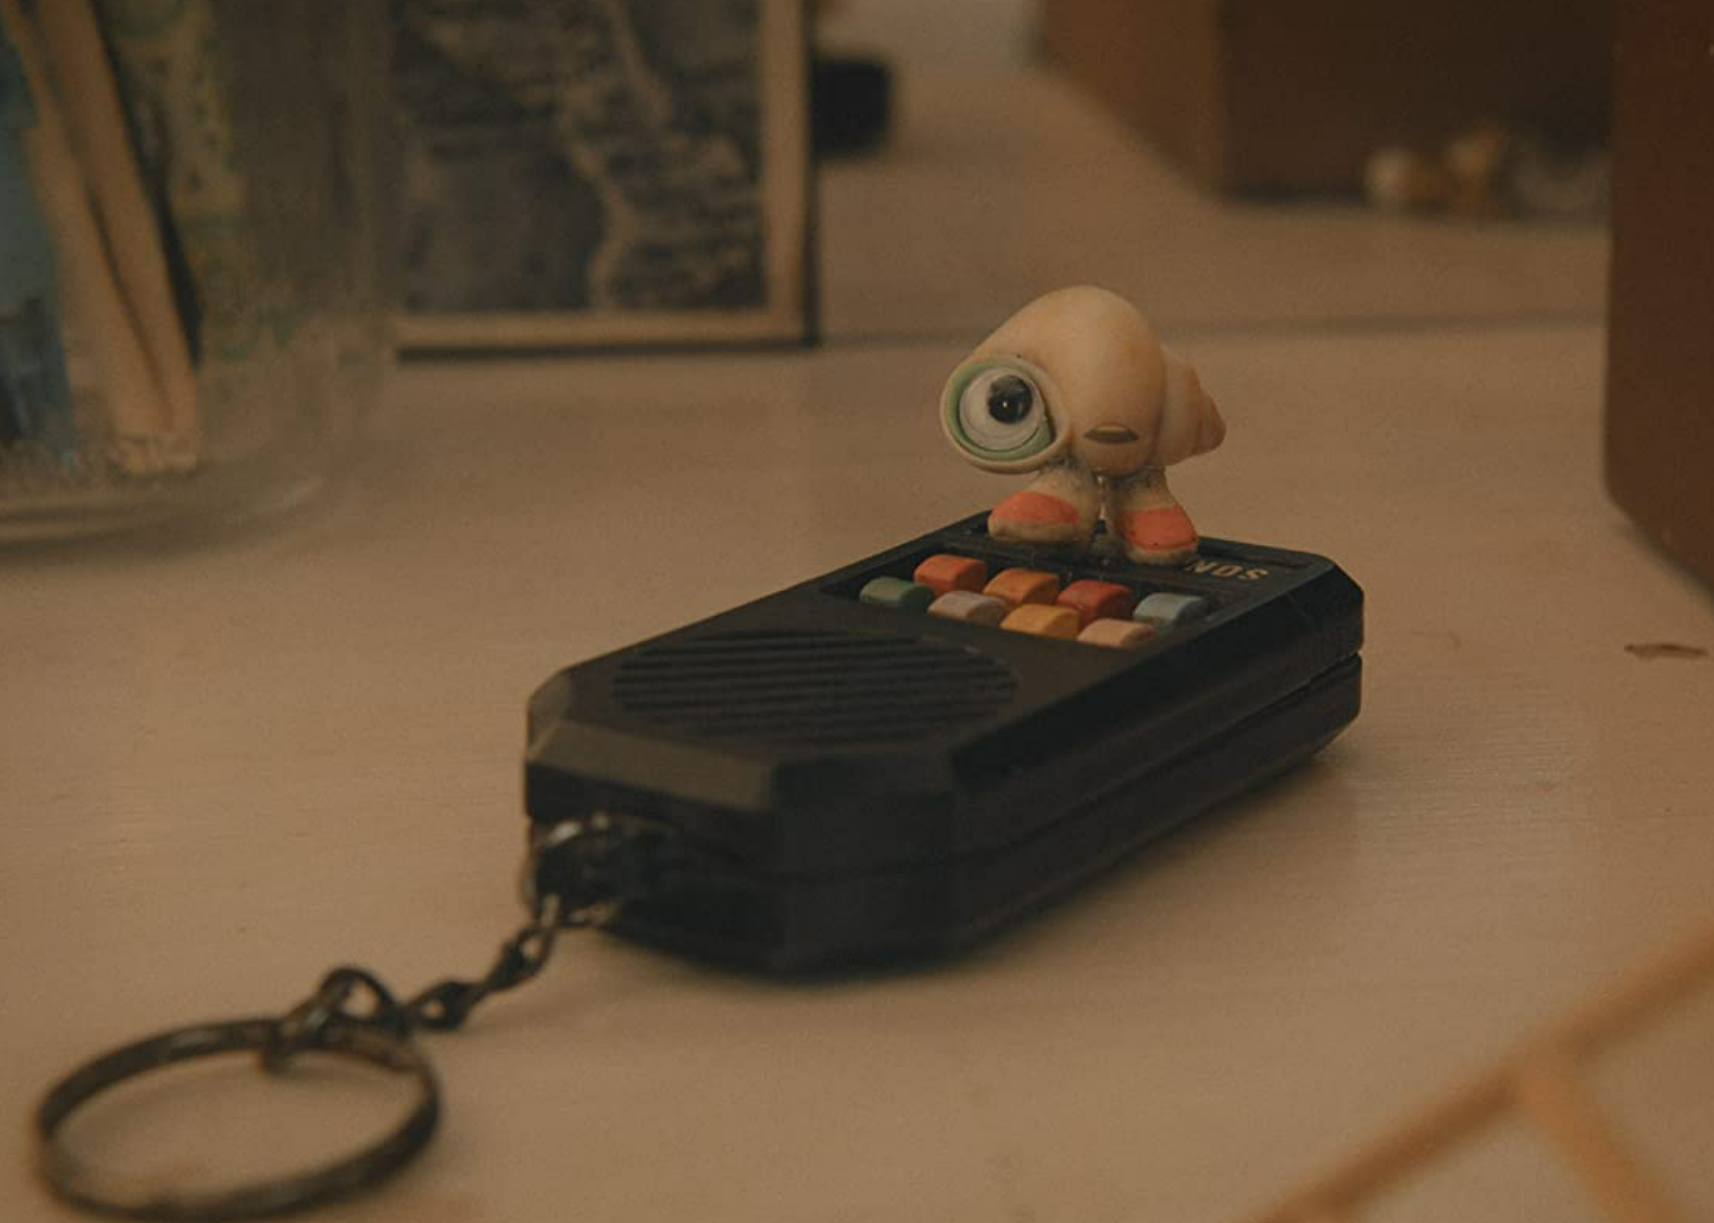 Screengrab of a scene from "Marcel the Shell with Shoes On".